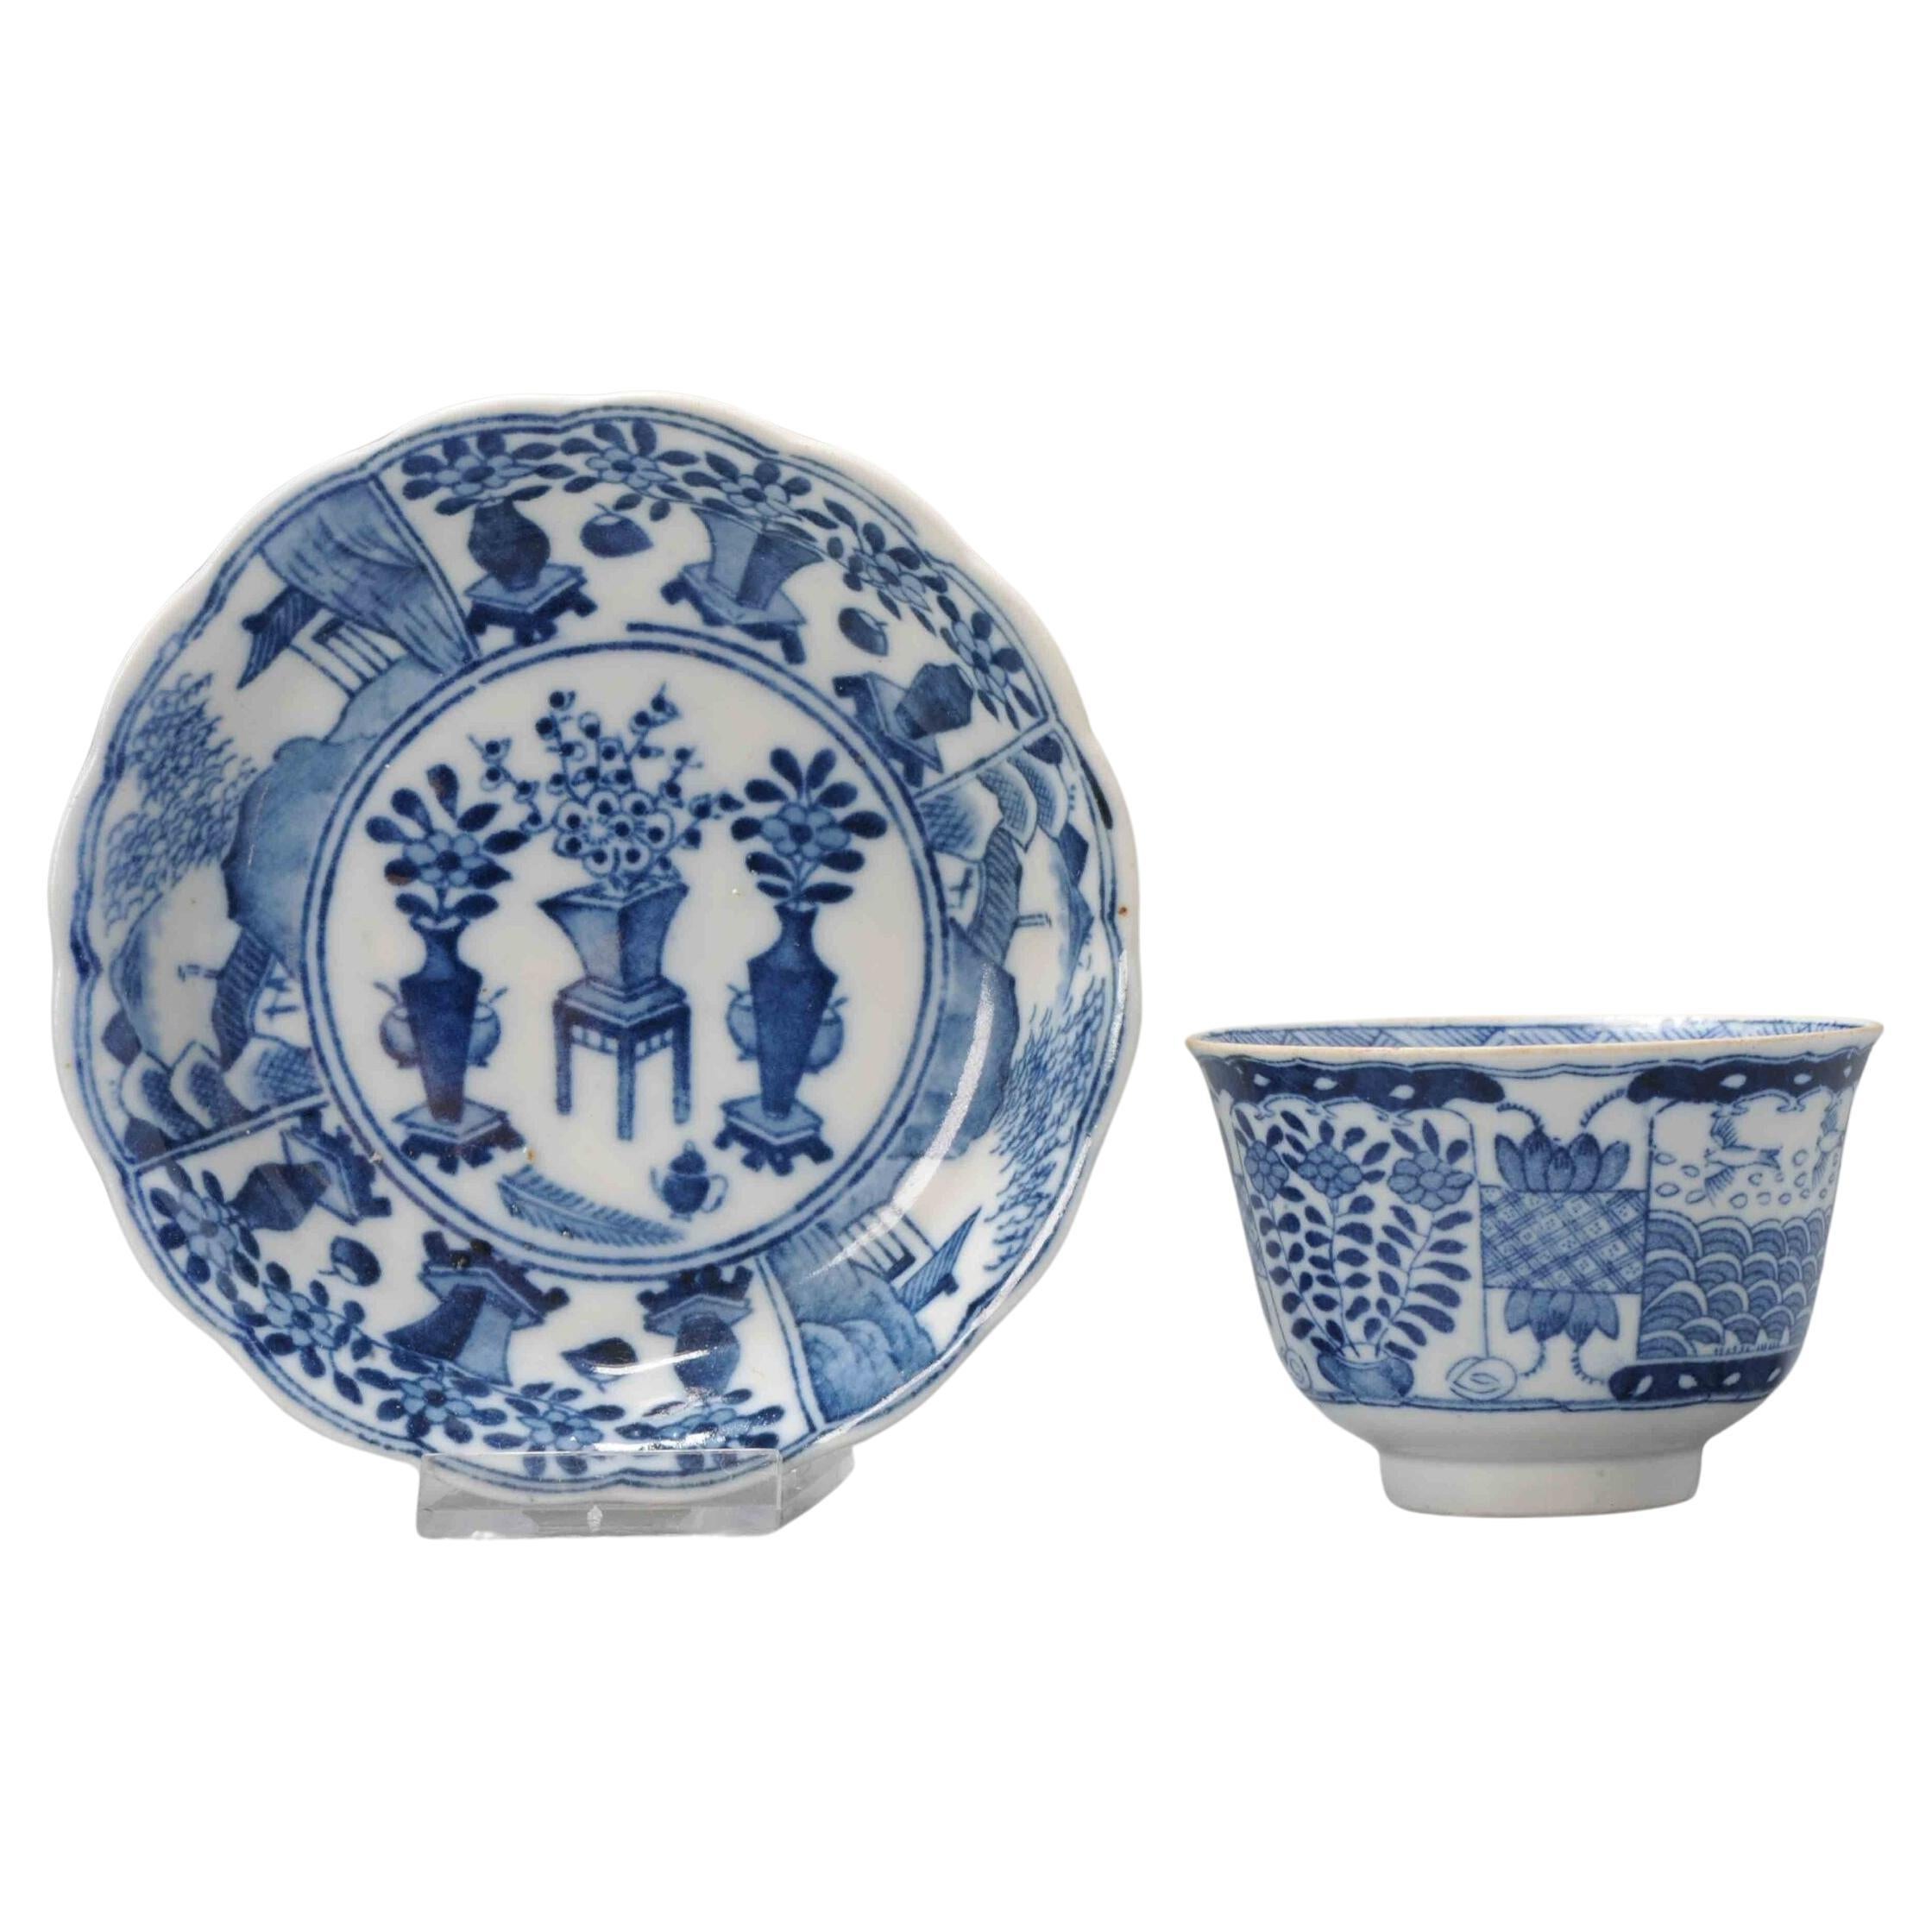 What is the Kangxi porcelain mark?